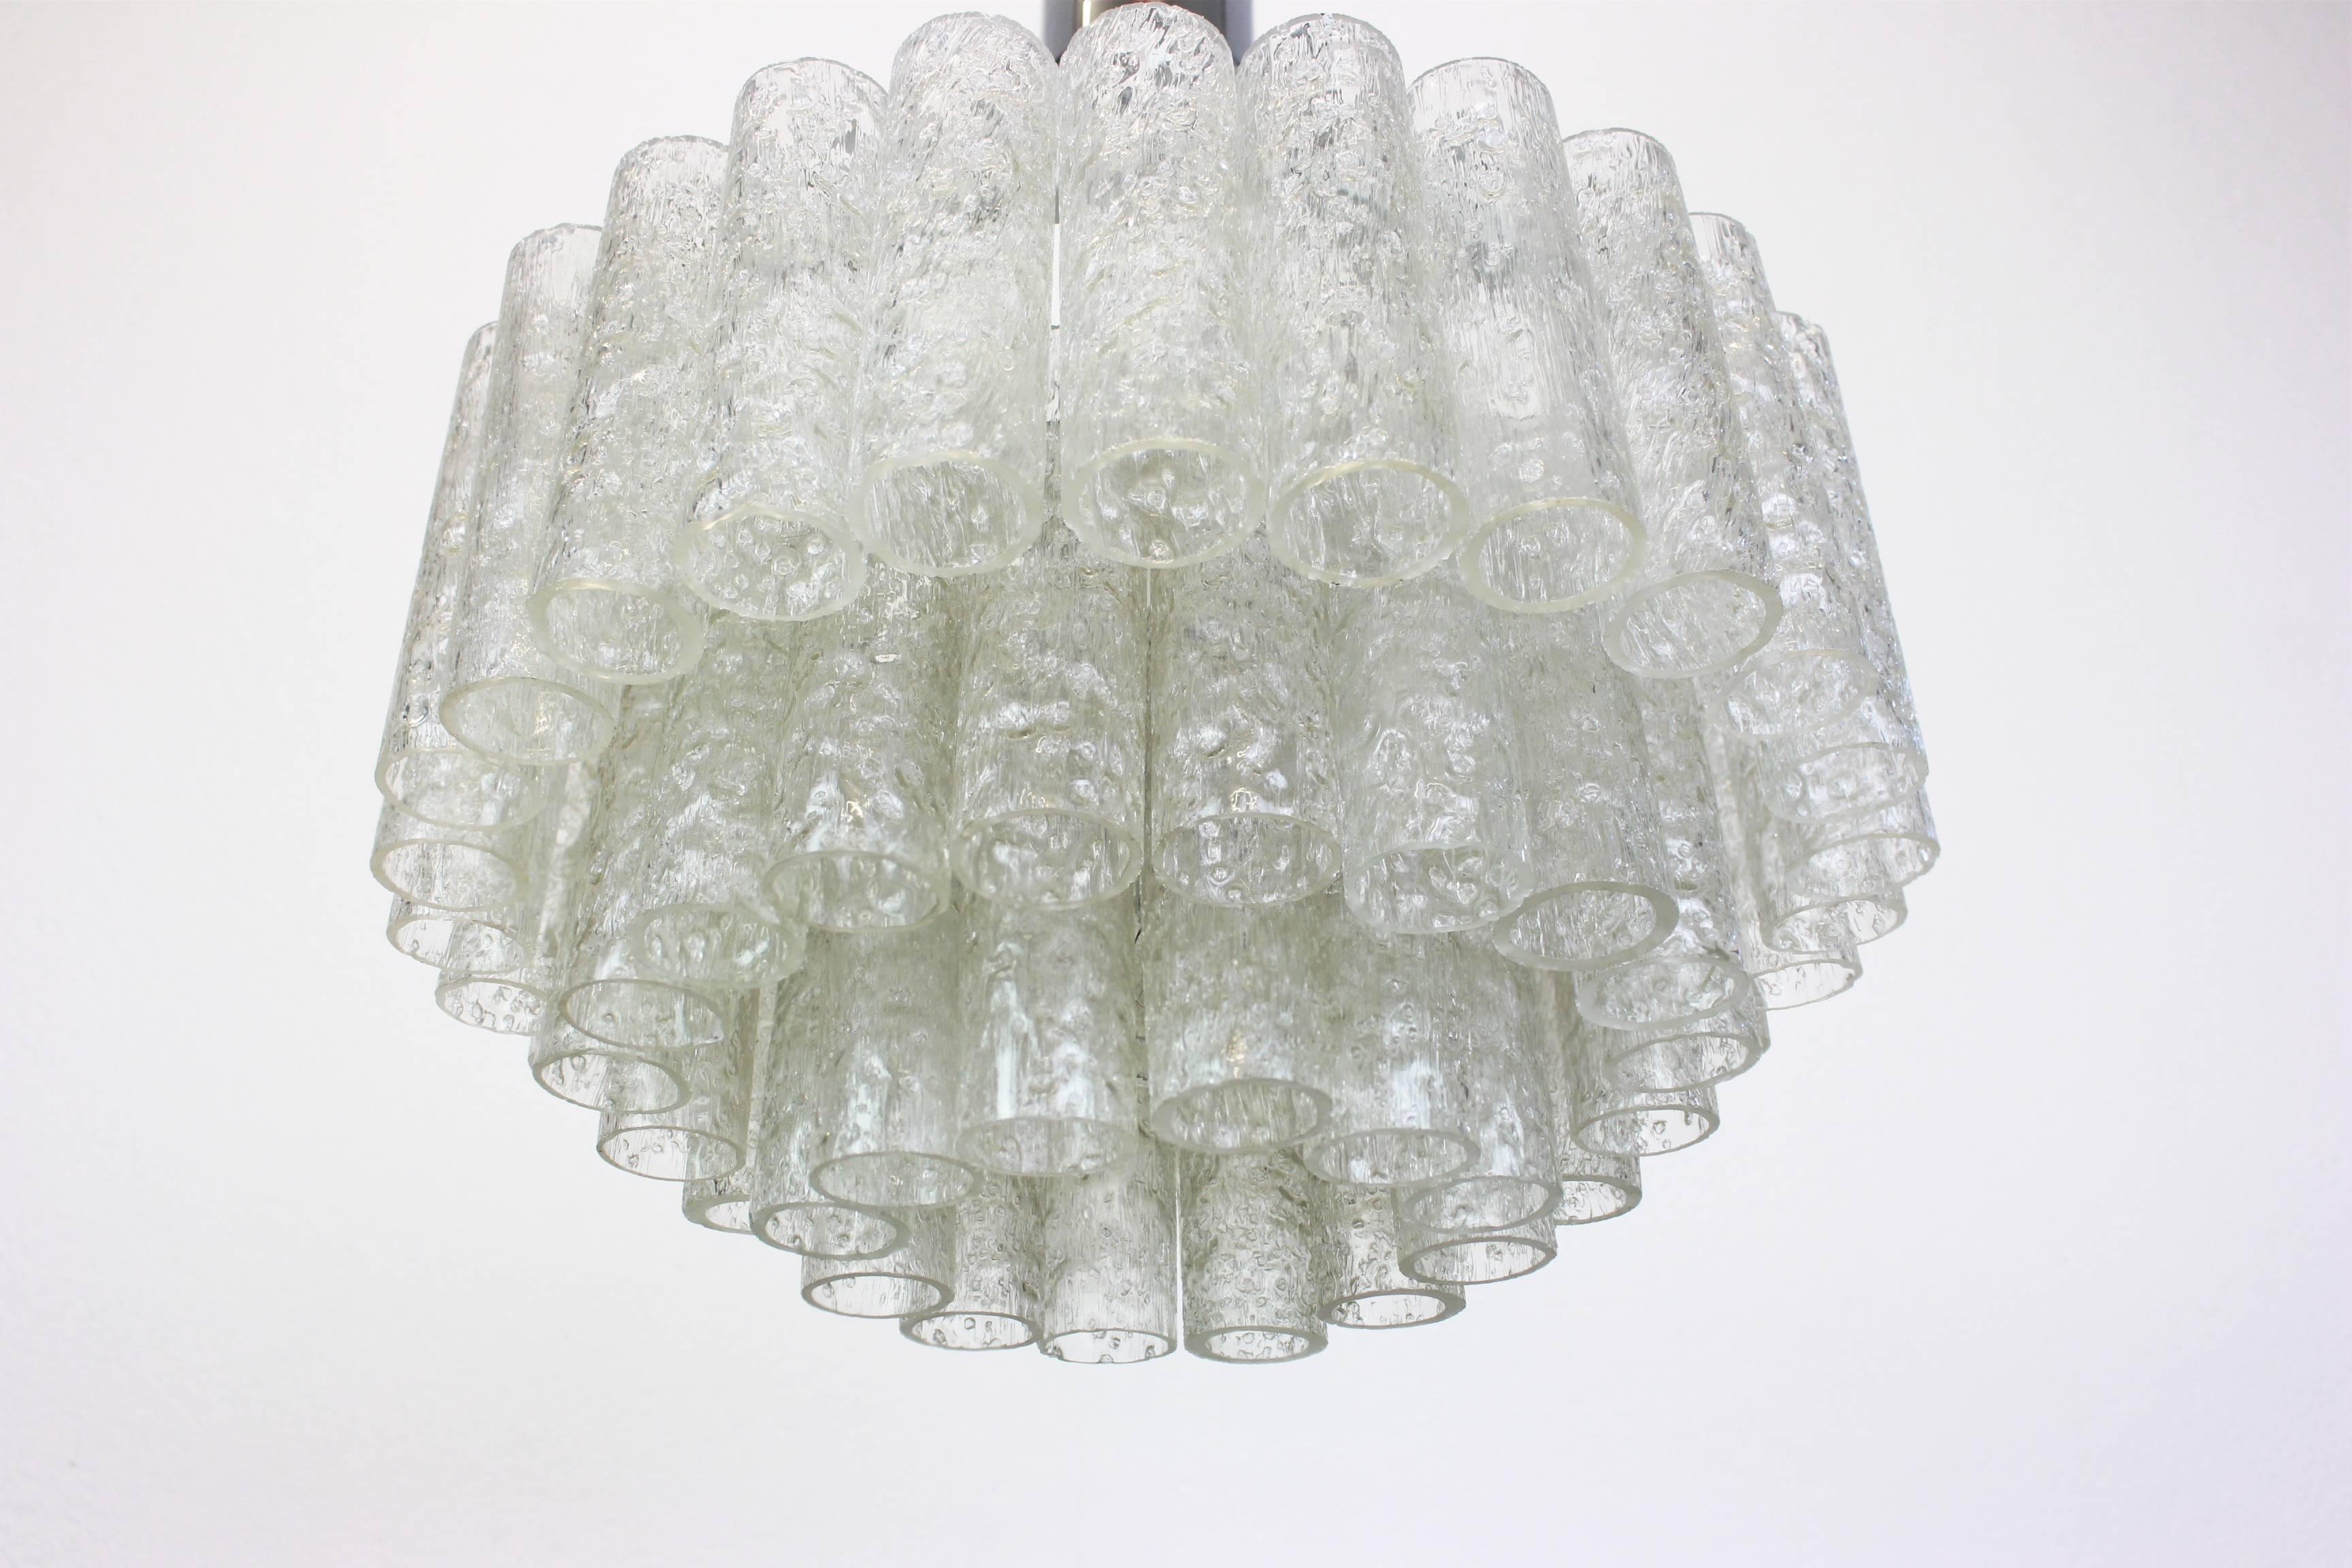 Fantastic three-tier midcentury chandelier by Doria, Germany, manufactured circa 1960-1969. Three rings of Murano glass cylinders suspended from a fixture.

Sockets: 4 x E14 candelabra bulbs (up to 40 W each) + 1 x E27 Standard
Light bulbs are not